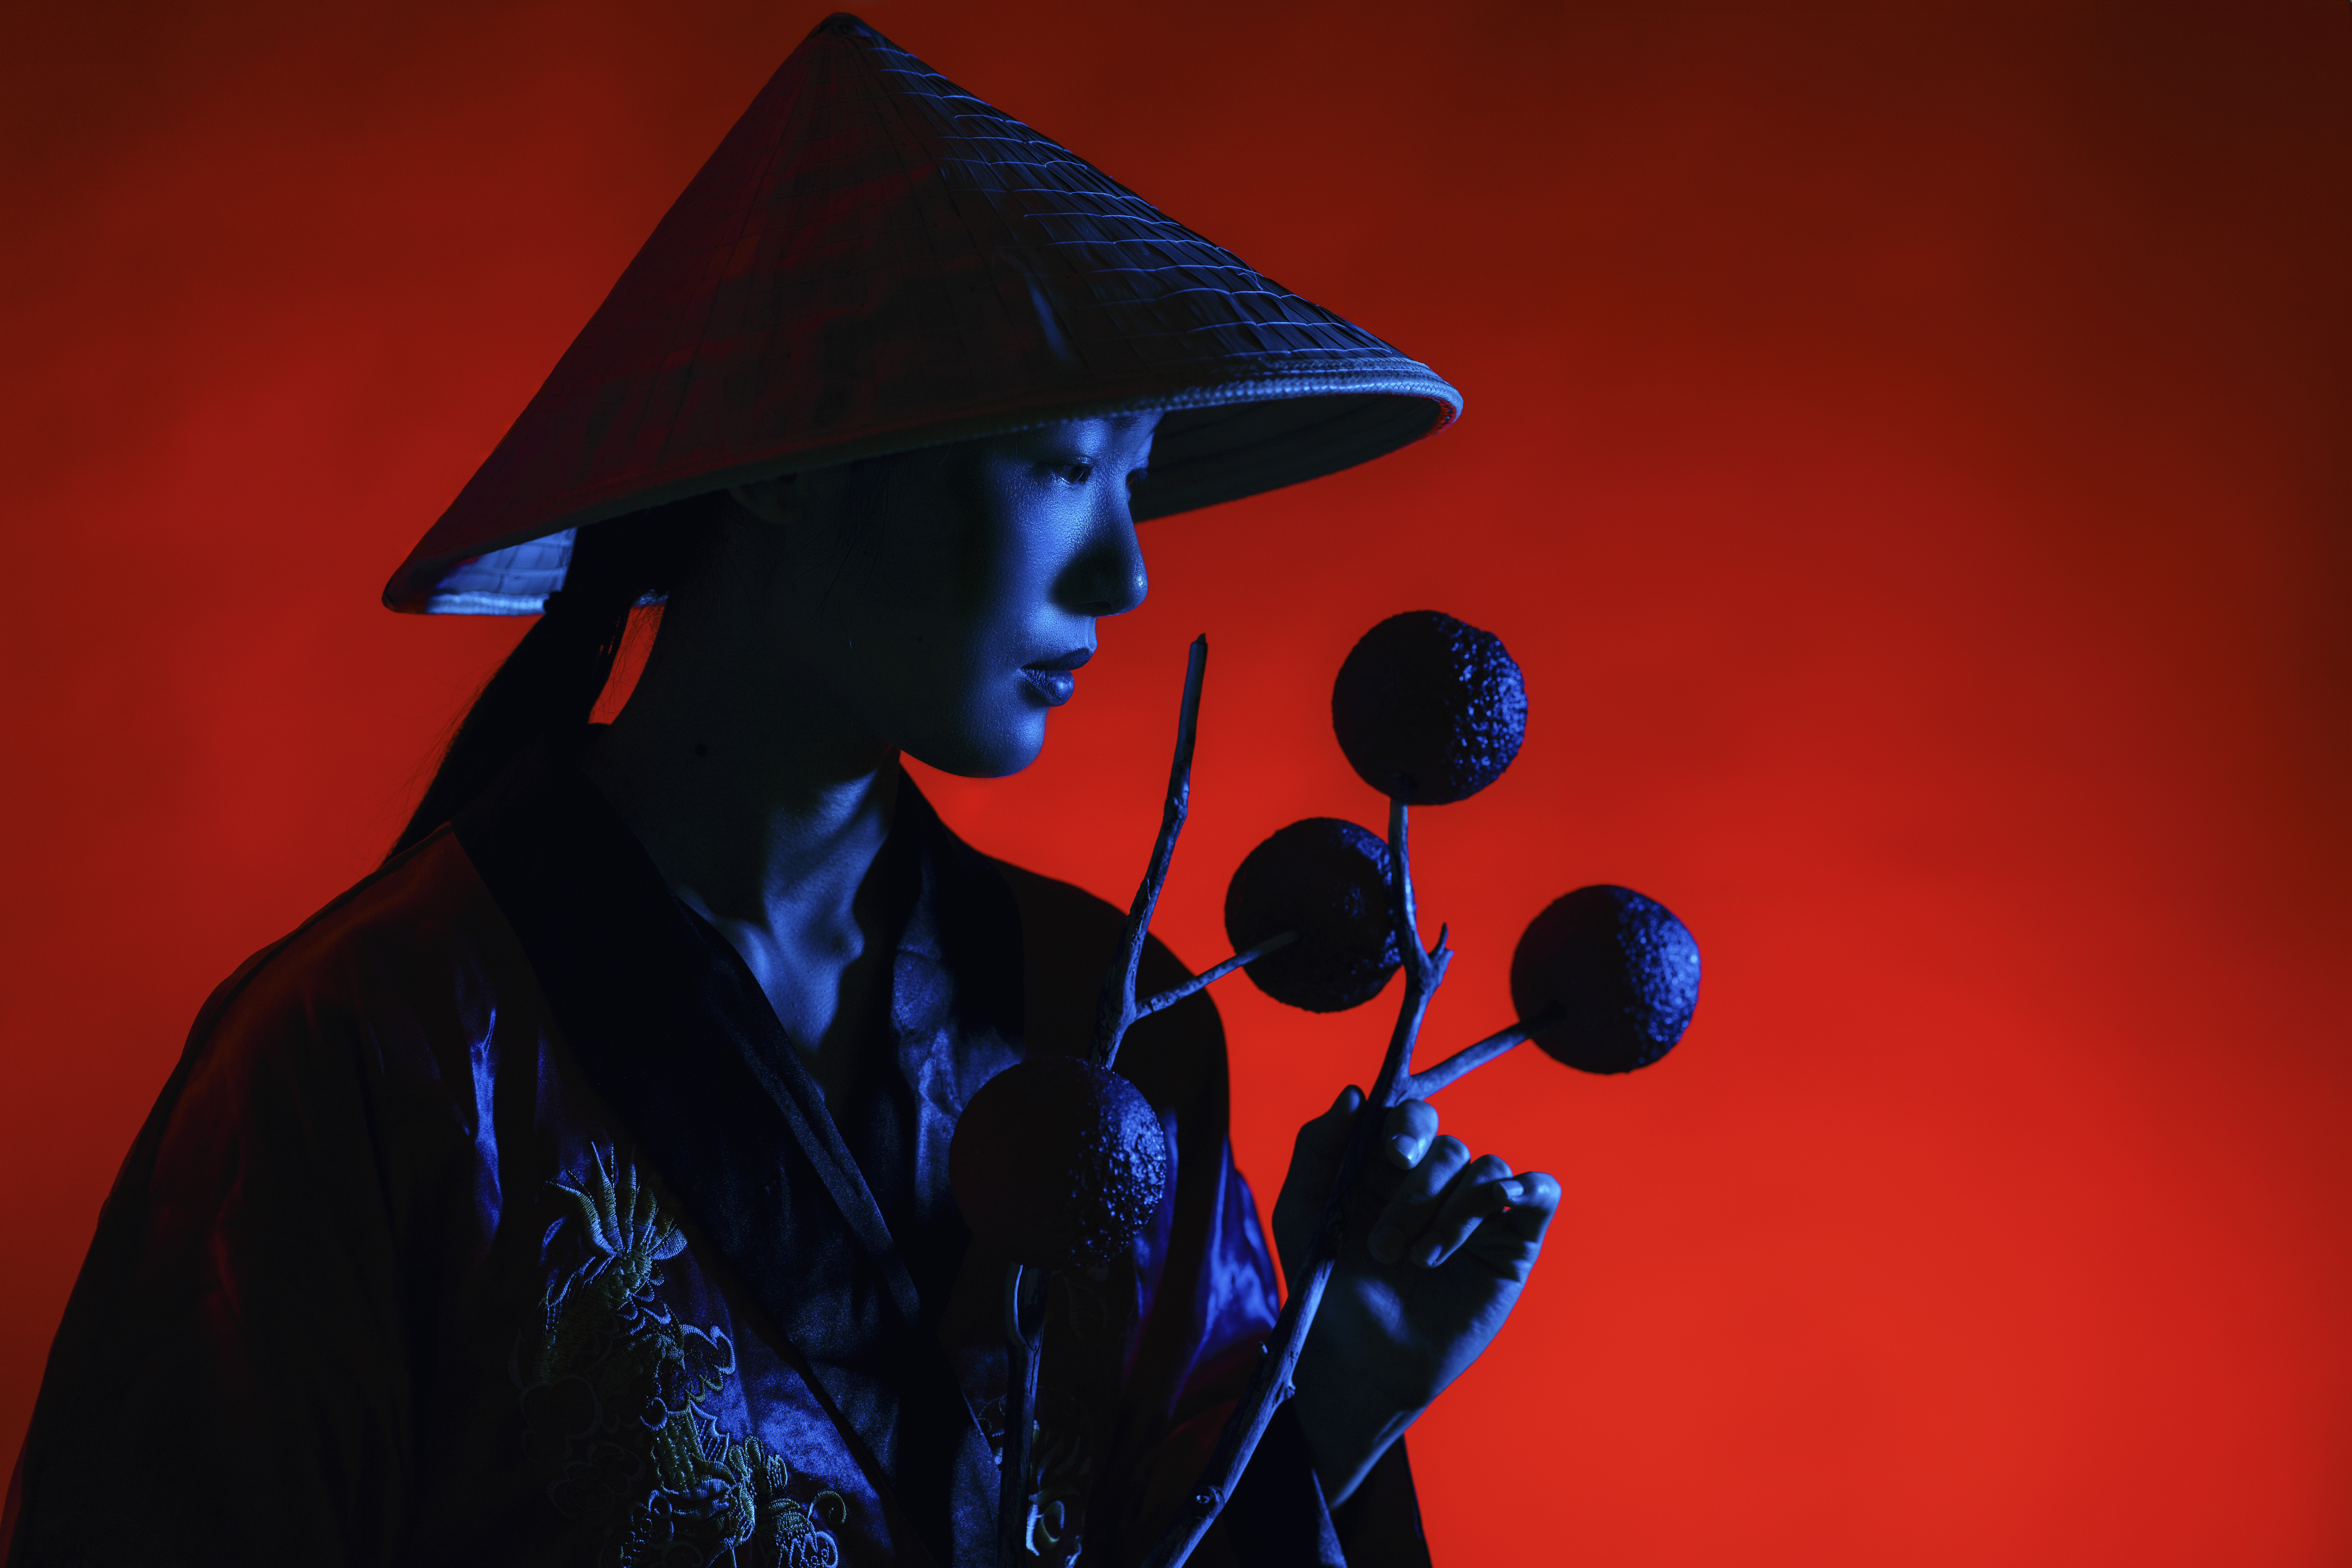 art, beauty, blue, chinese girl, close-up, creative, dreaminess, elegance, fashion, femininity, hat, indoors, lifestyles, light, looking, one person, portrait, pose, sadness, shadow, side view, standing, studio shot, traditional clothing, young woman, Alex Tsarfin